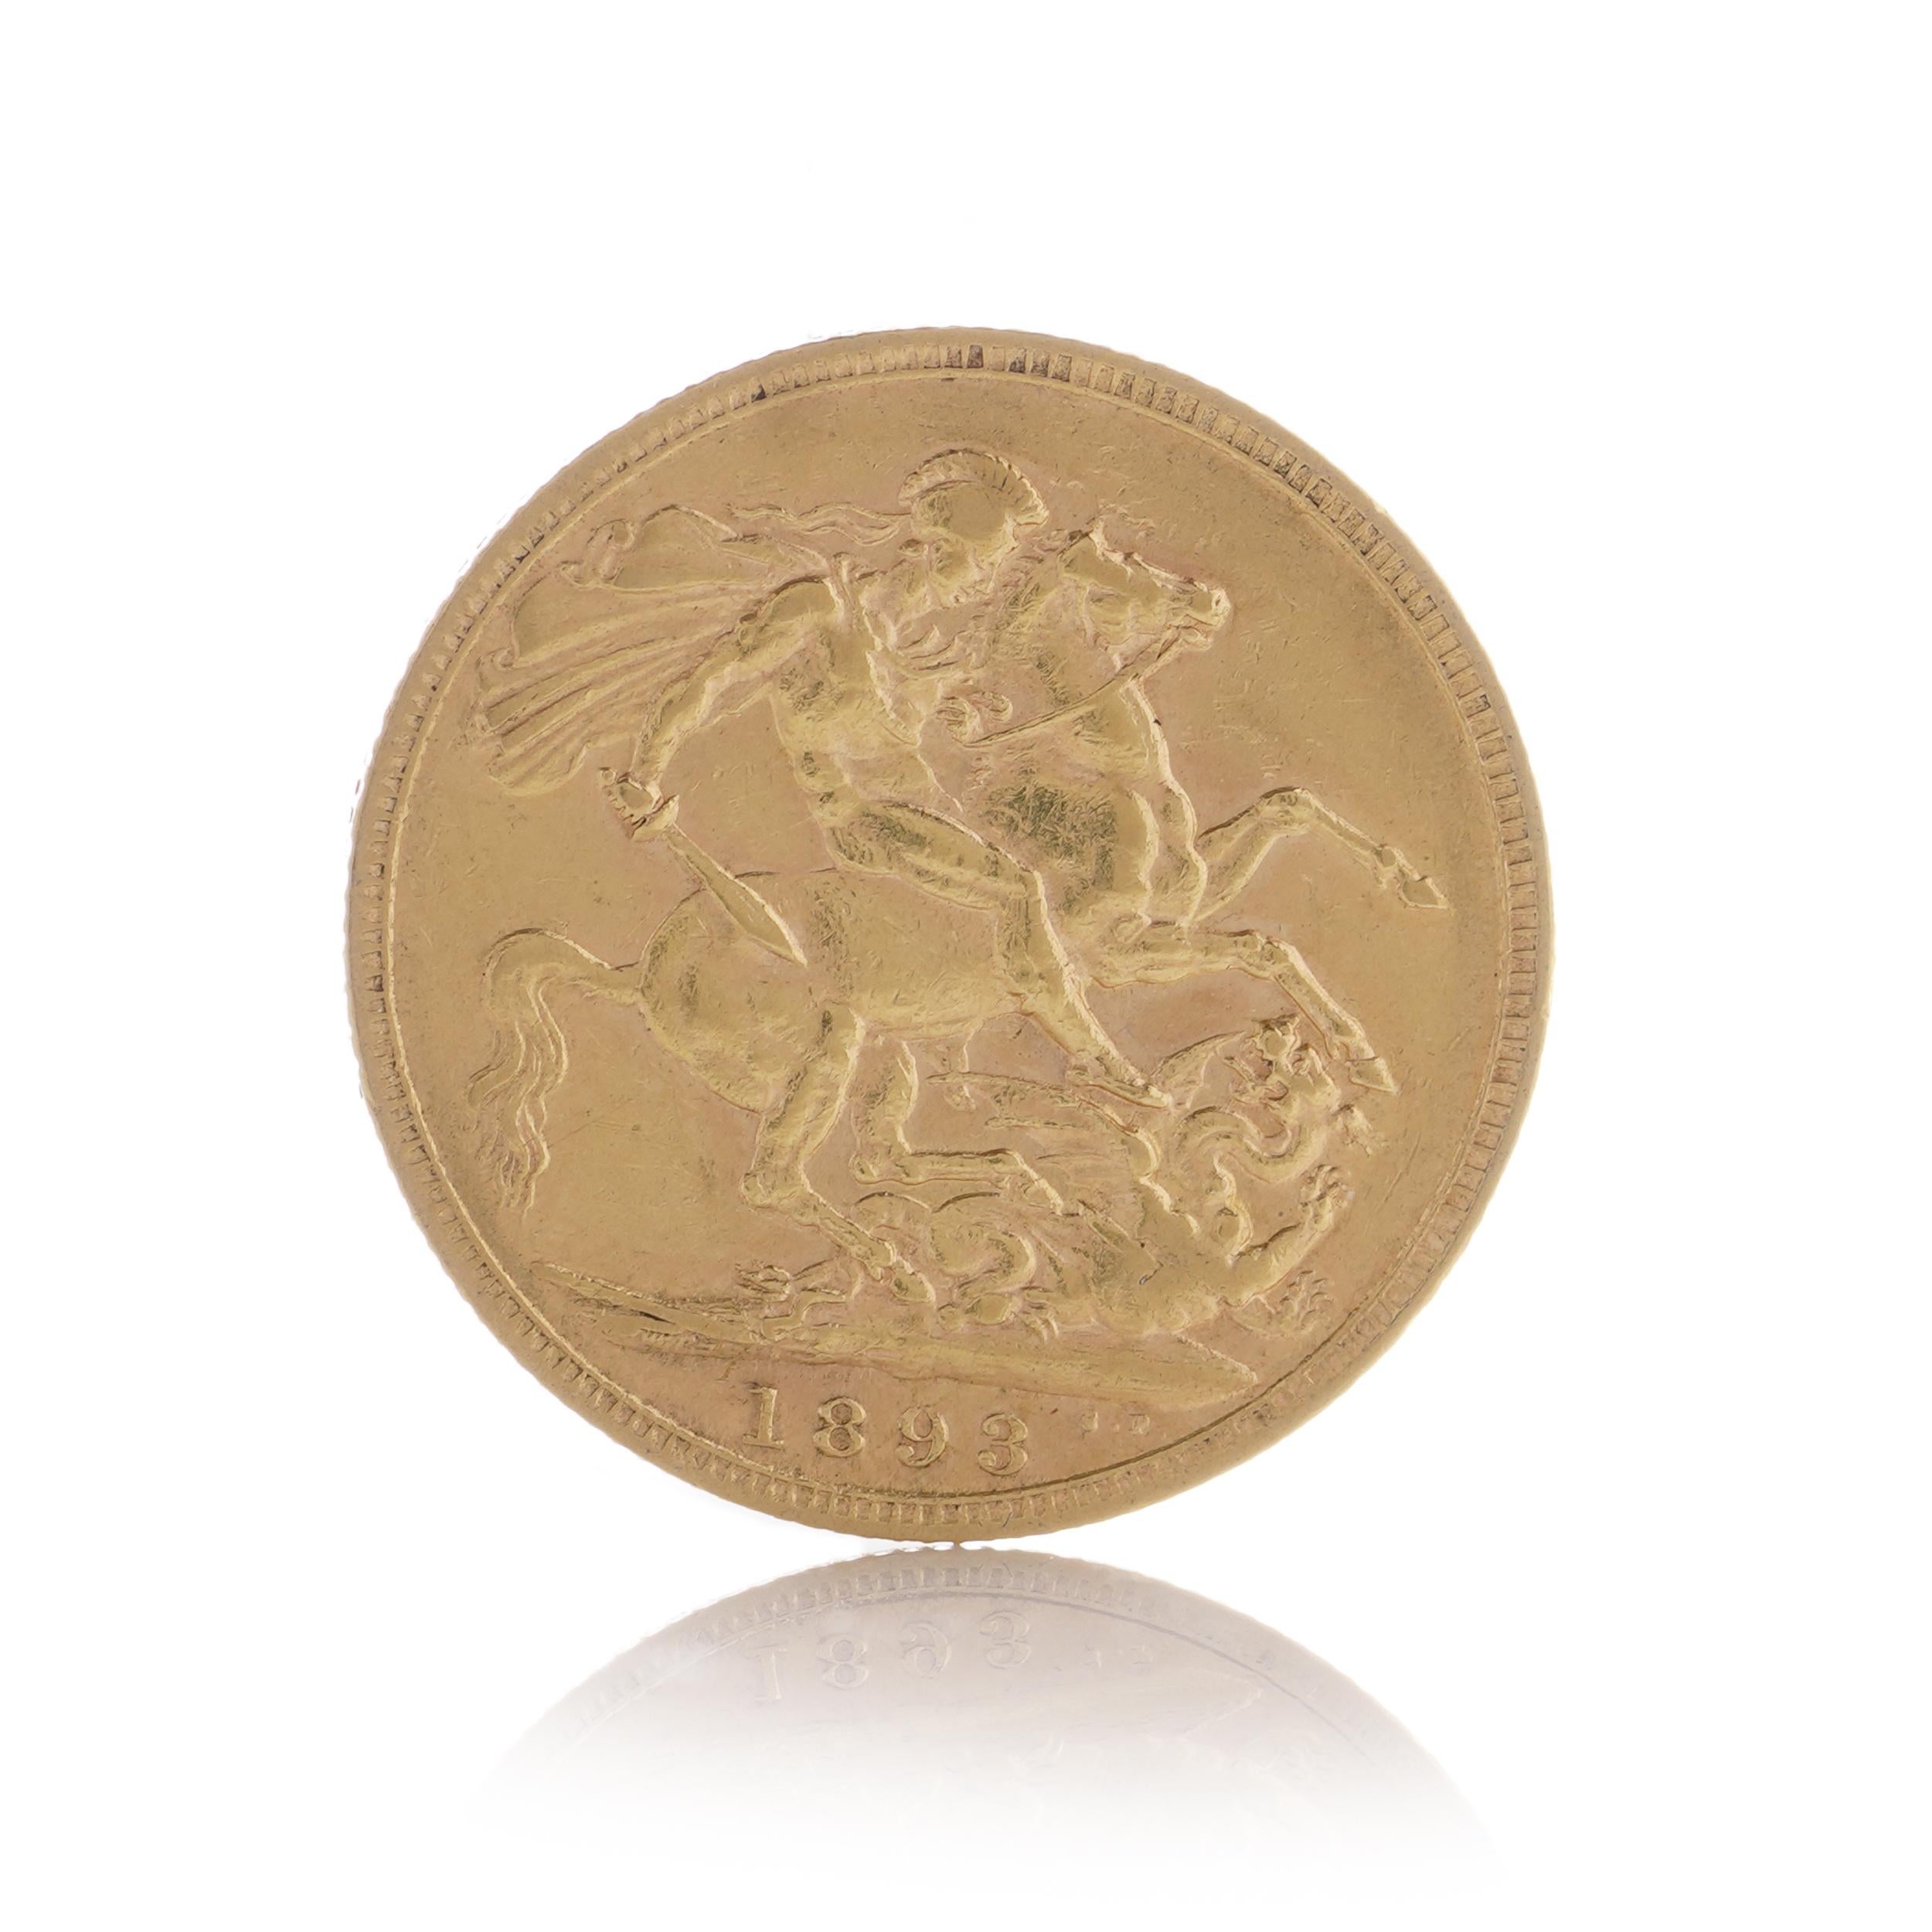 This is an 1893 gold Sovereign with the portrait of Queen Victoria, featuring the traditional George and Dragon design and provided in a plastic capsule. The M mintmark denotes the Melbourne Mint in Australia.

Manufacturer: Royal Mint
Weight